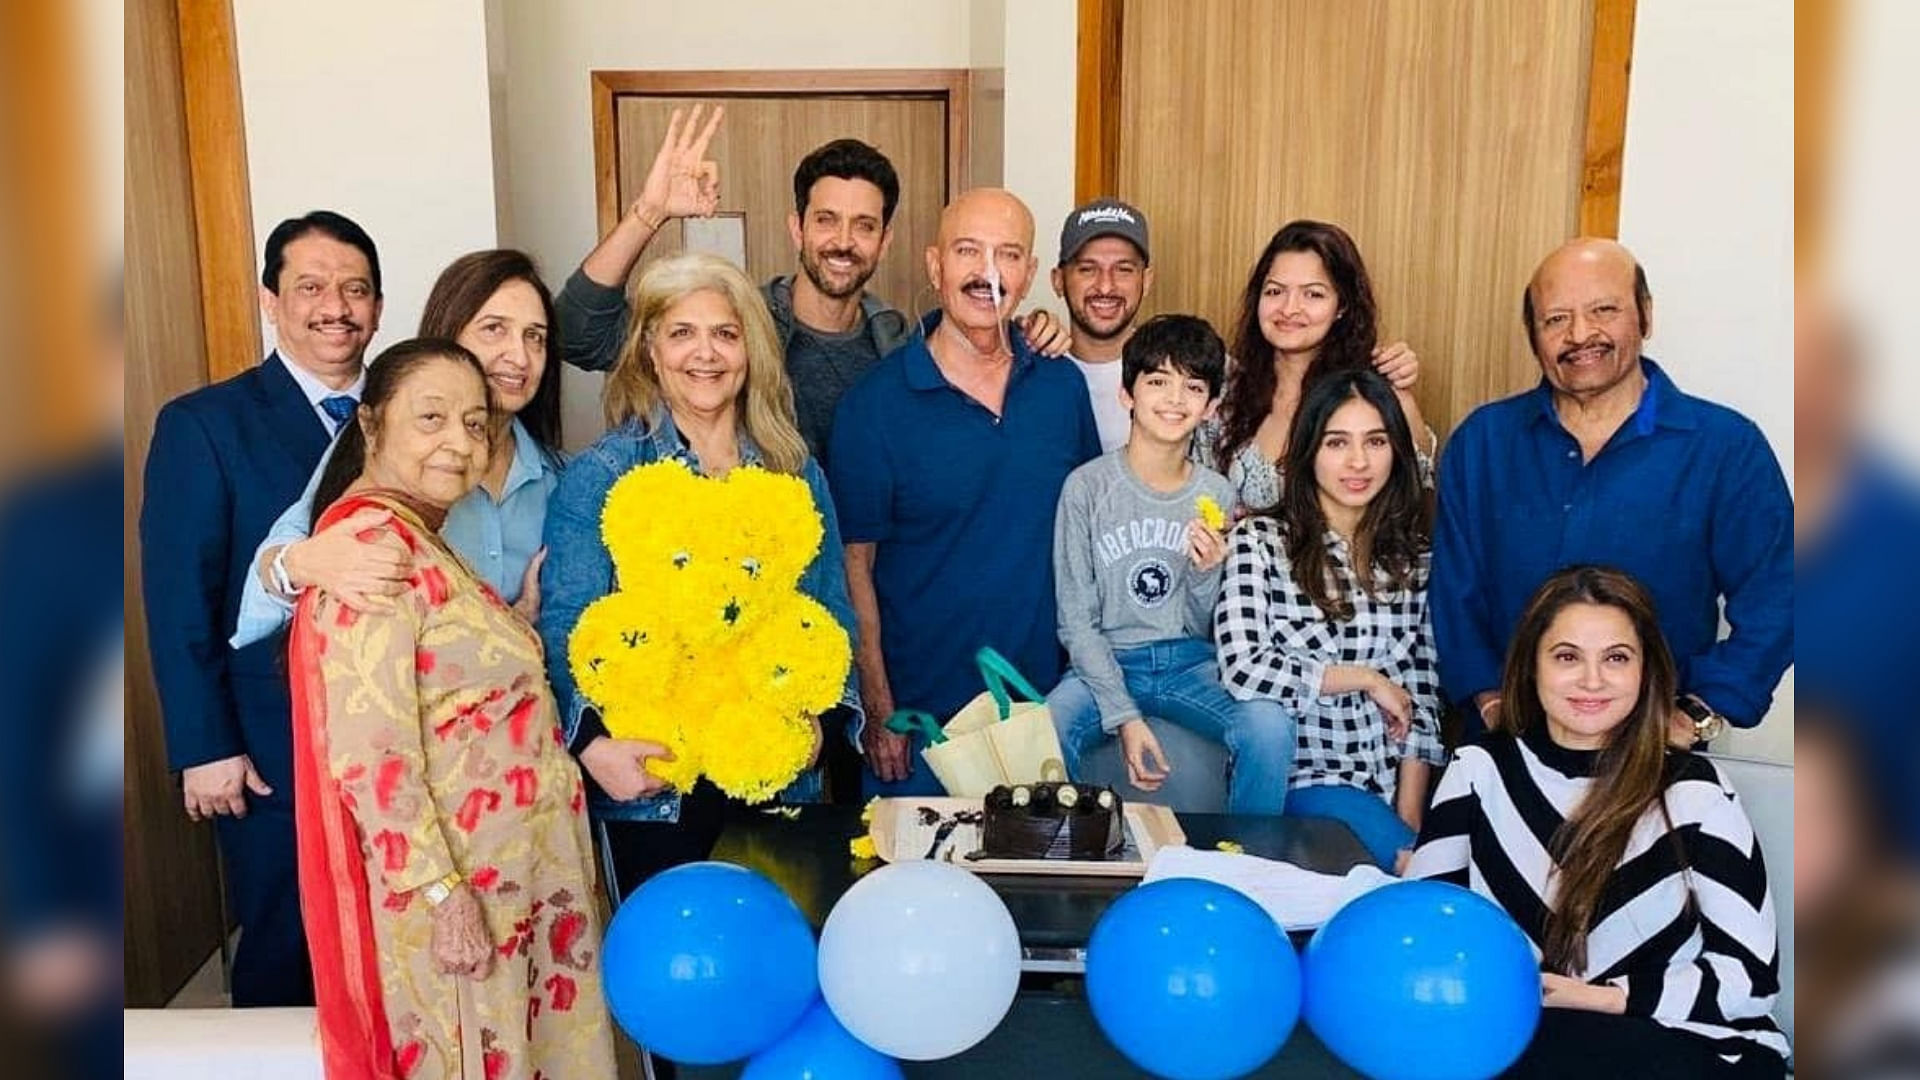 Hrithik Roshan brought in his birthday with dad Rakesh Roshan and family.